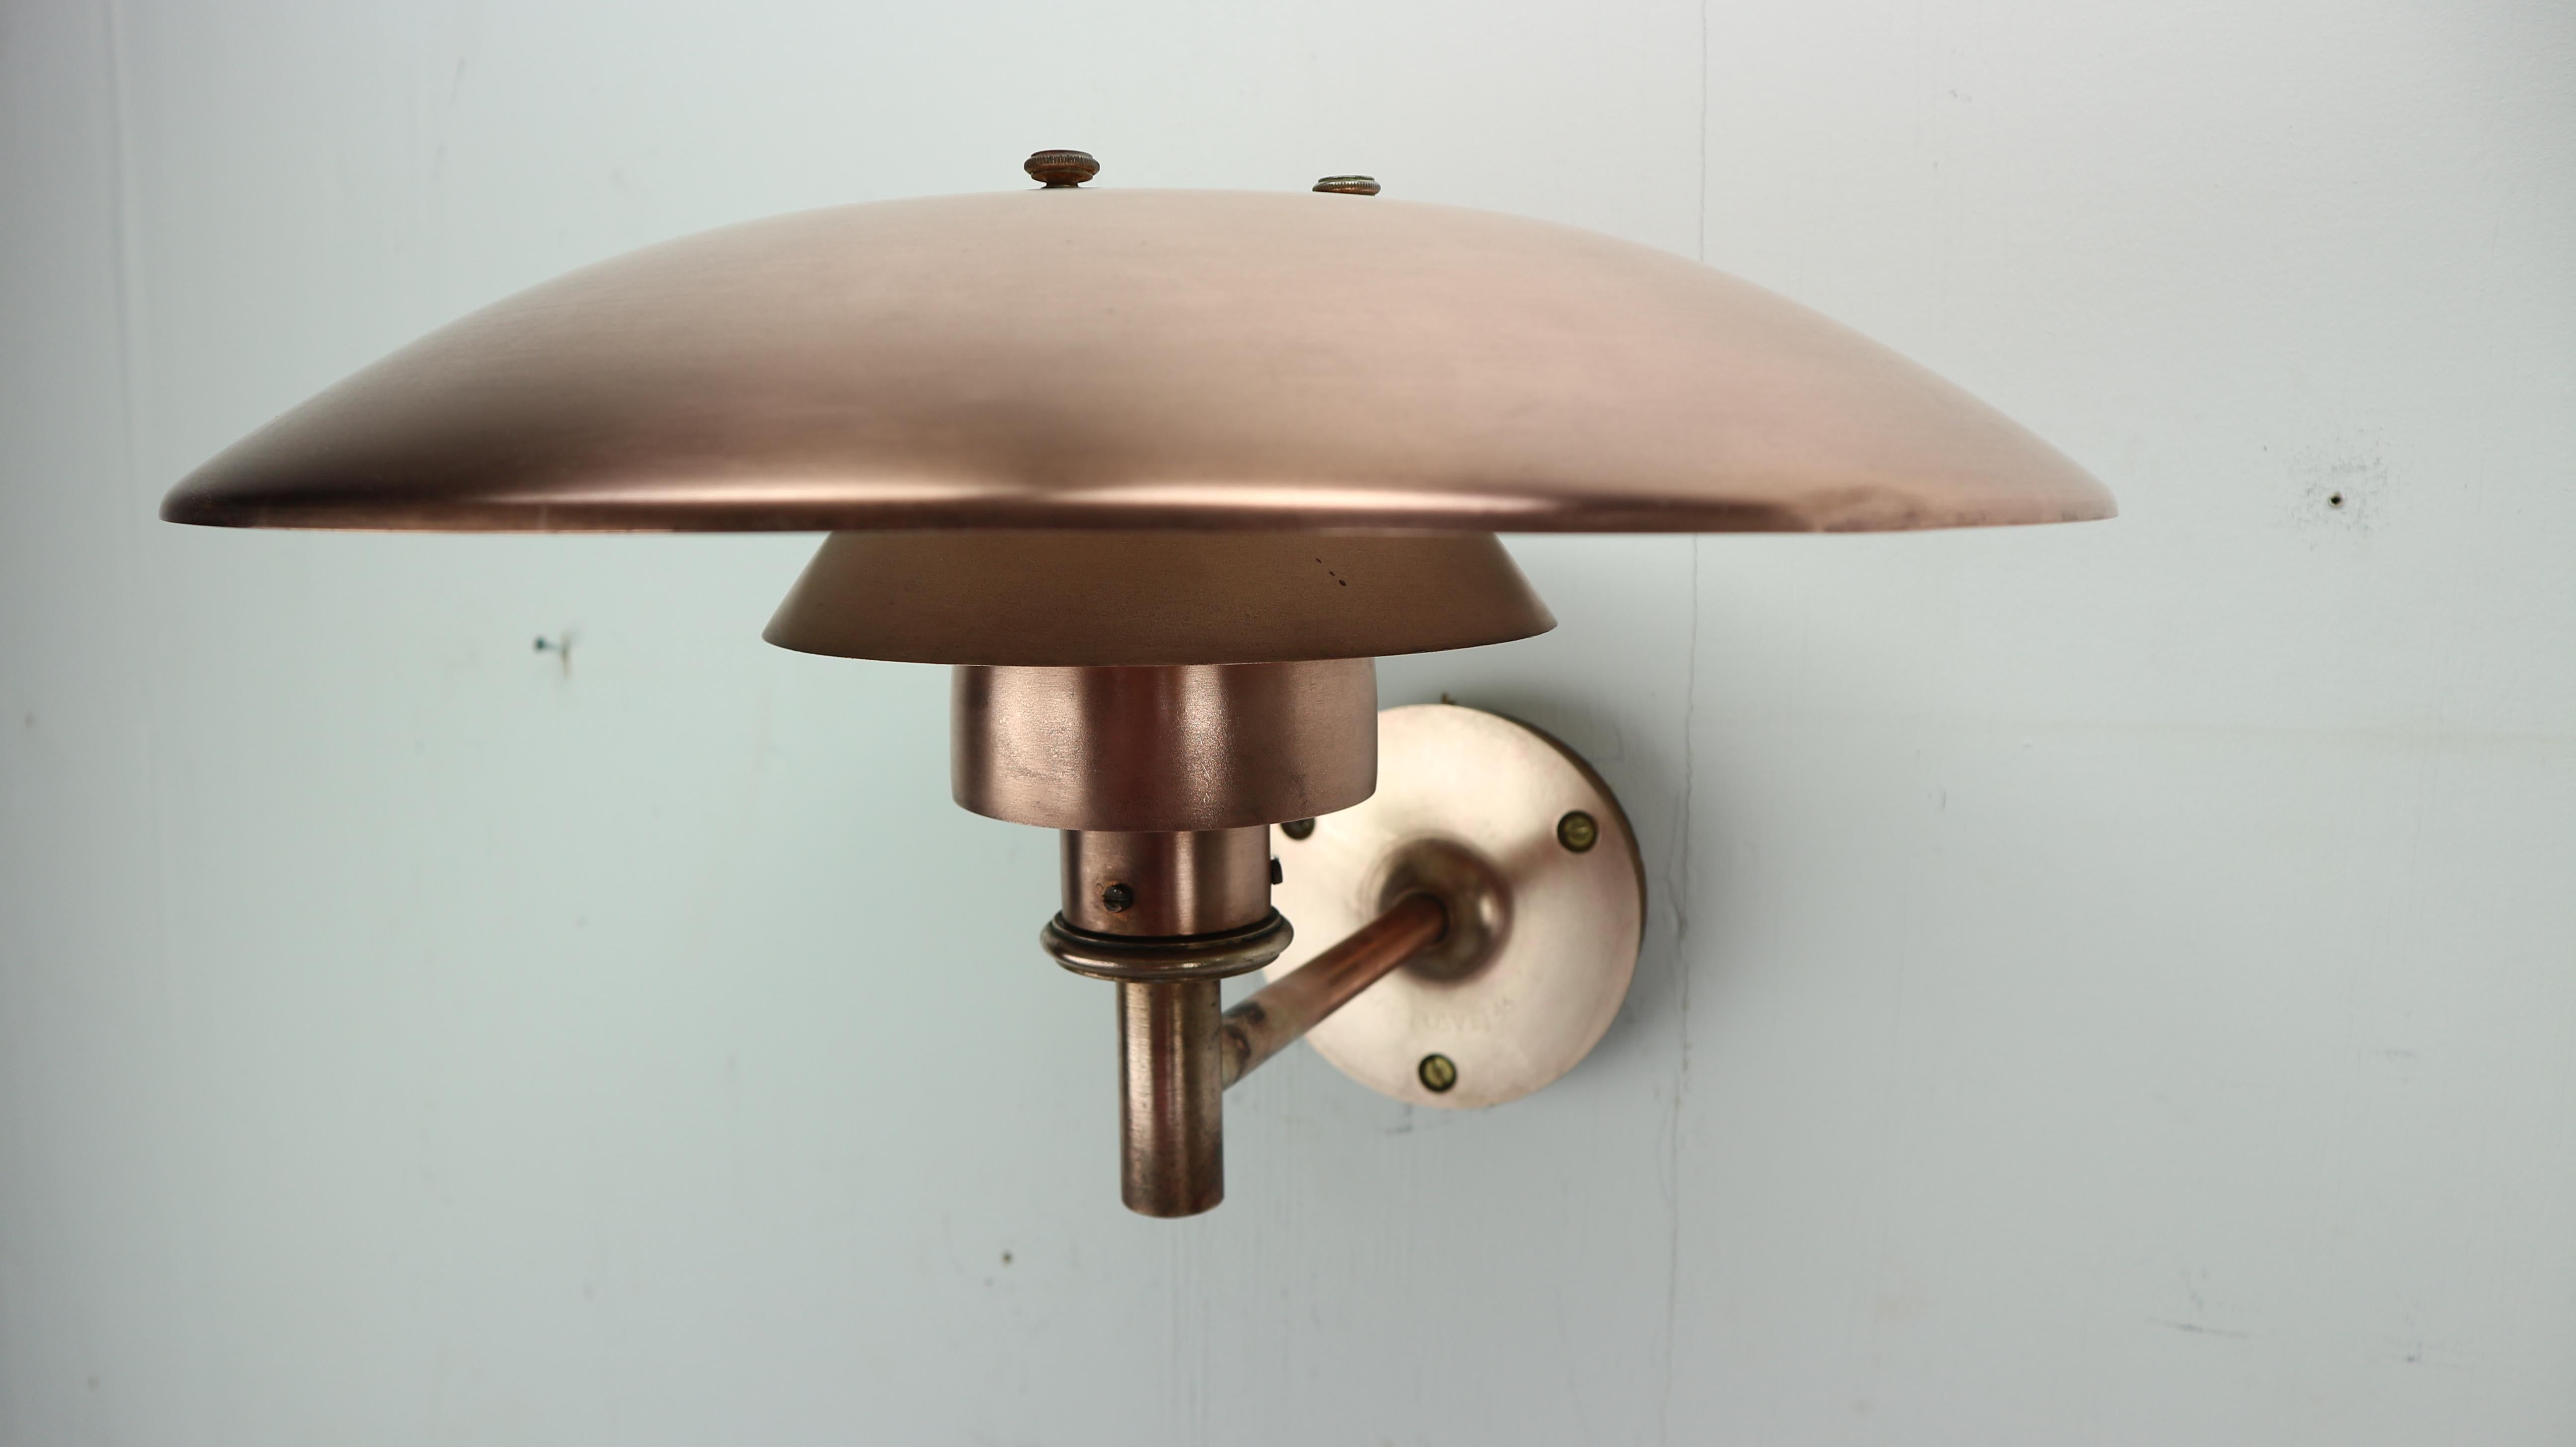 This unique wall lamp is designed by Poul Henningsen for Louis Poulsen in 1960 circa and made in Denmark.
Copper lamp is having age-related patina.
The lamp’s design is based on the IDEA of a set of reflective shades which create balanced,